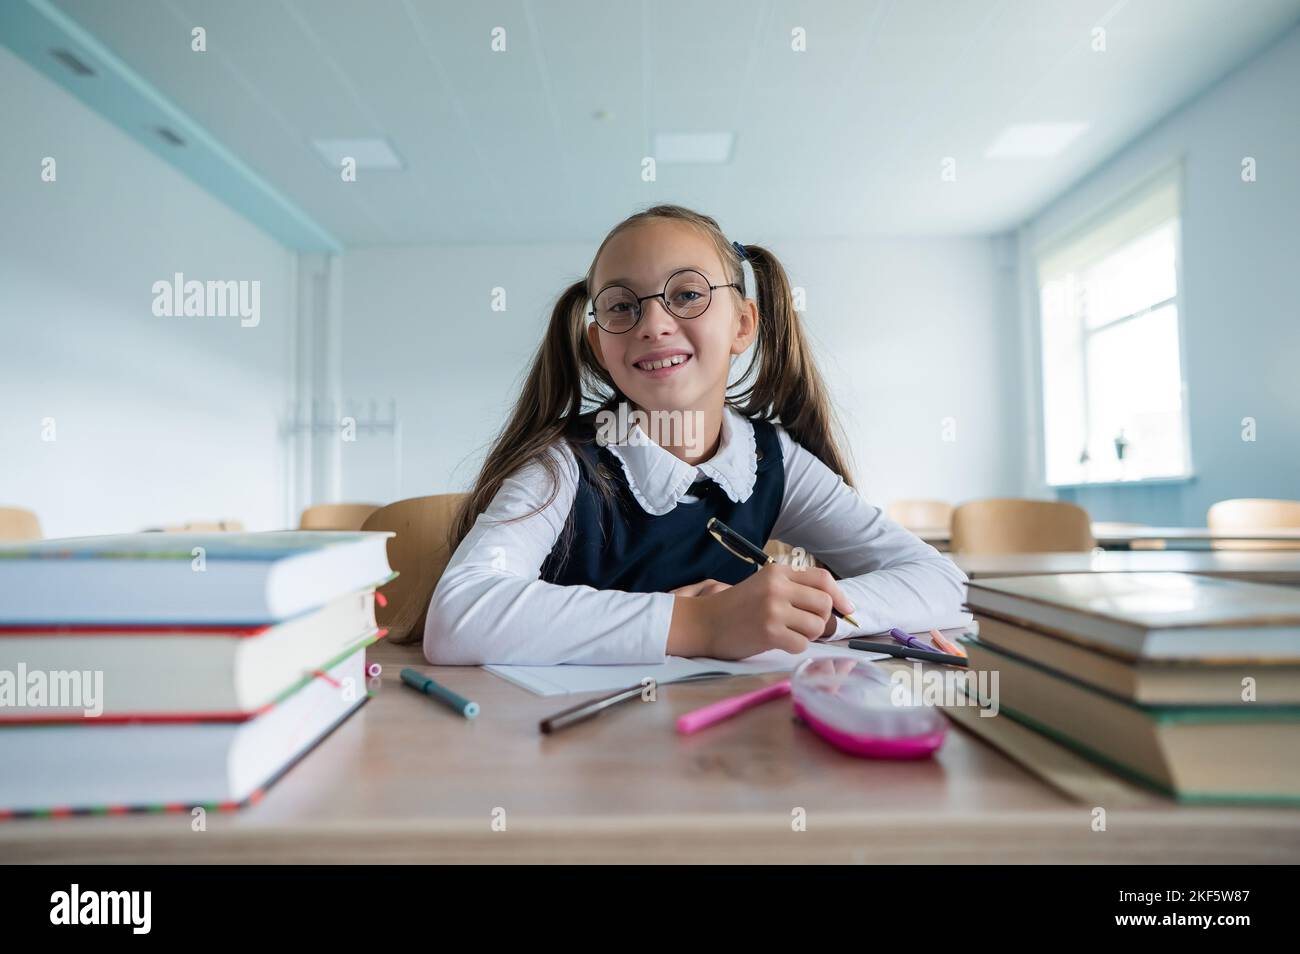 Caucasian girl with two ponytails sits at her desk and writes in a workbook. Stock Photo